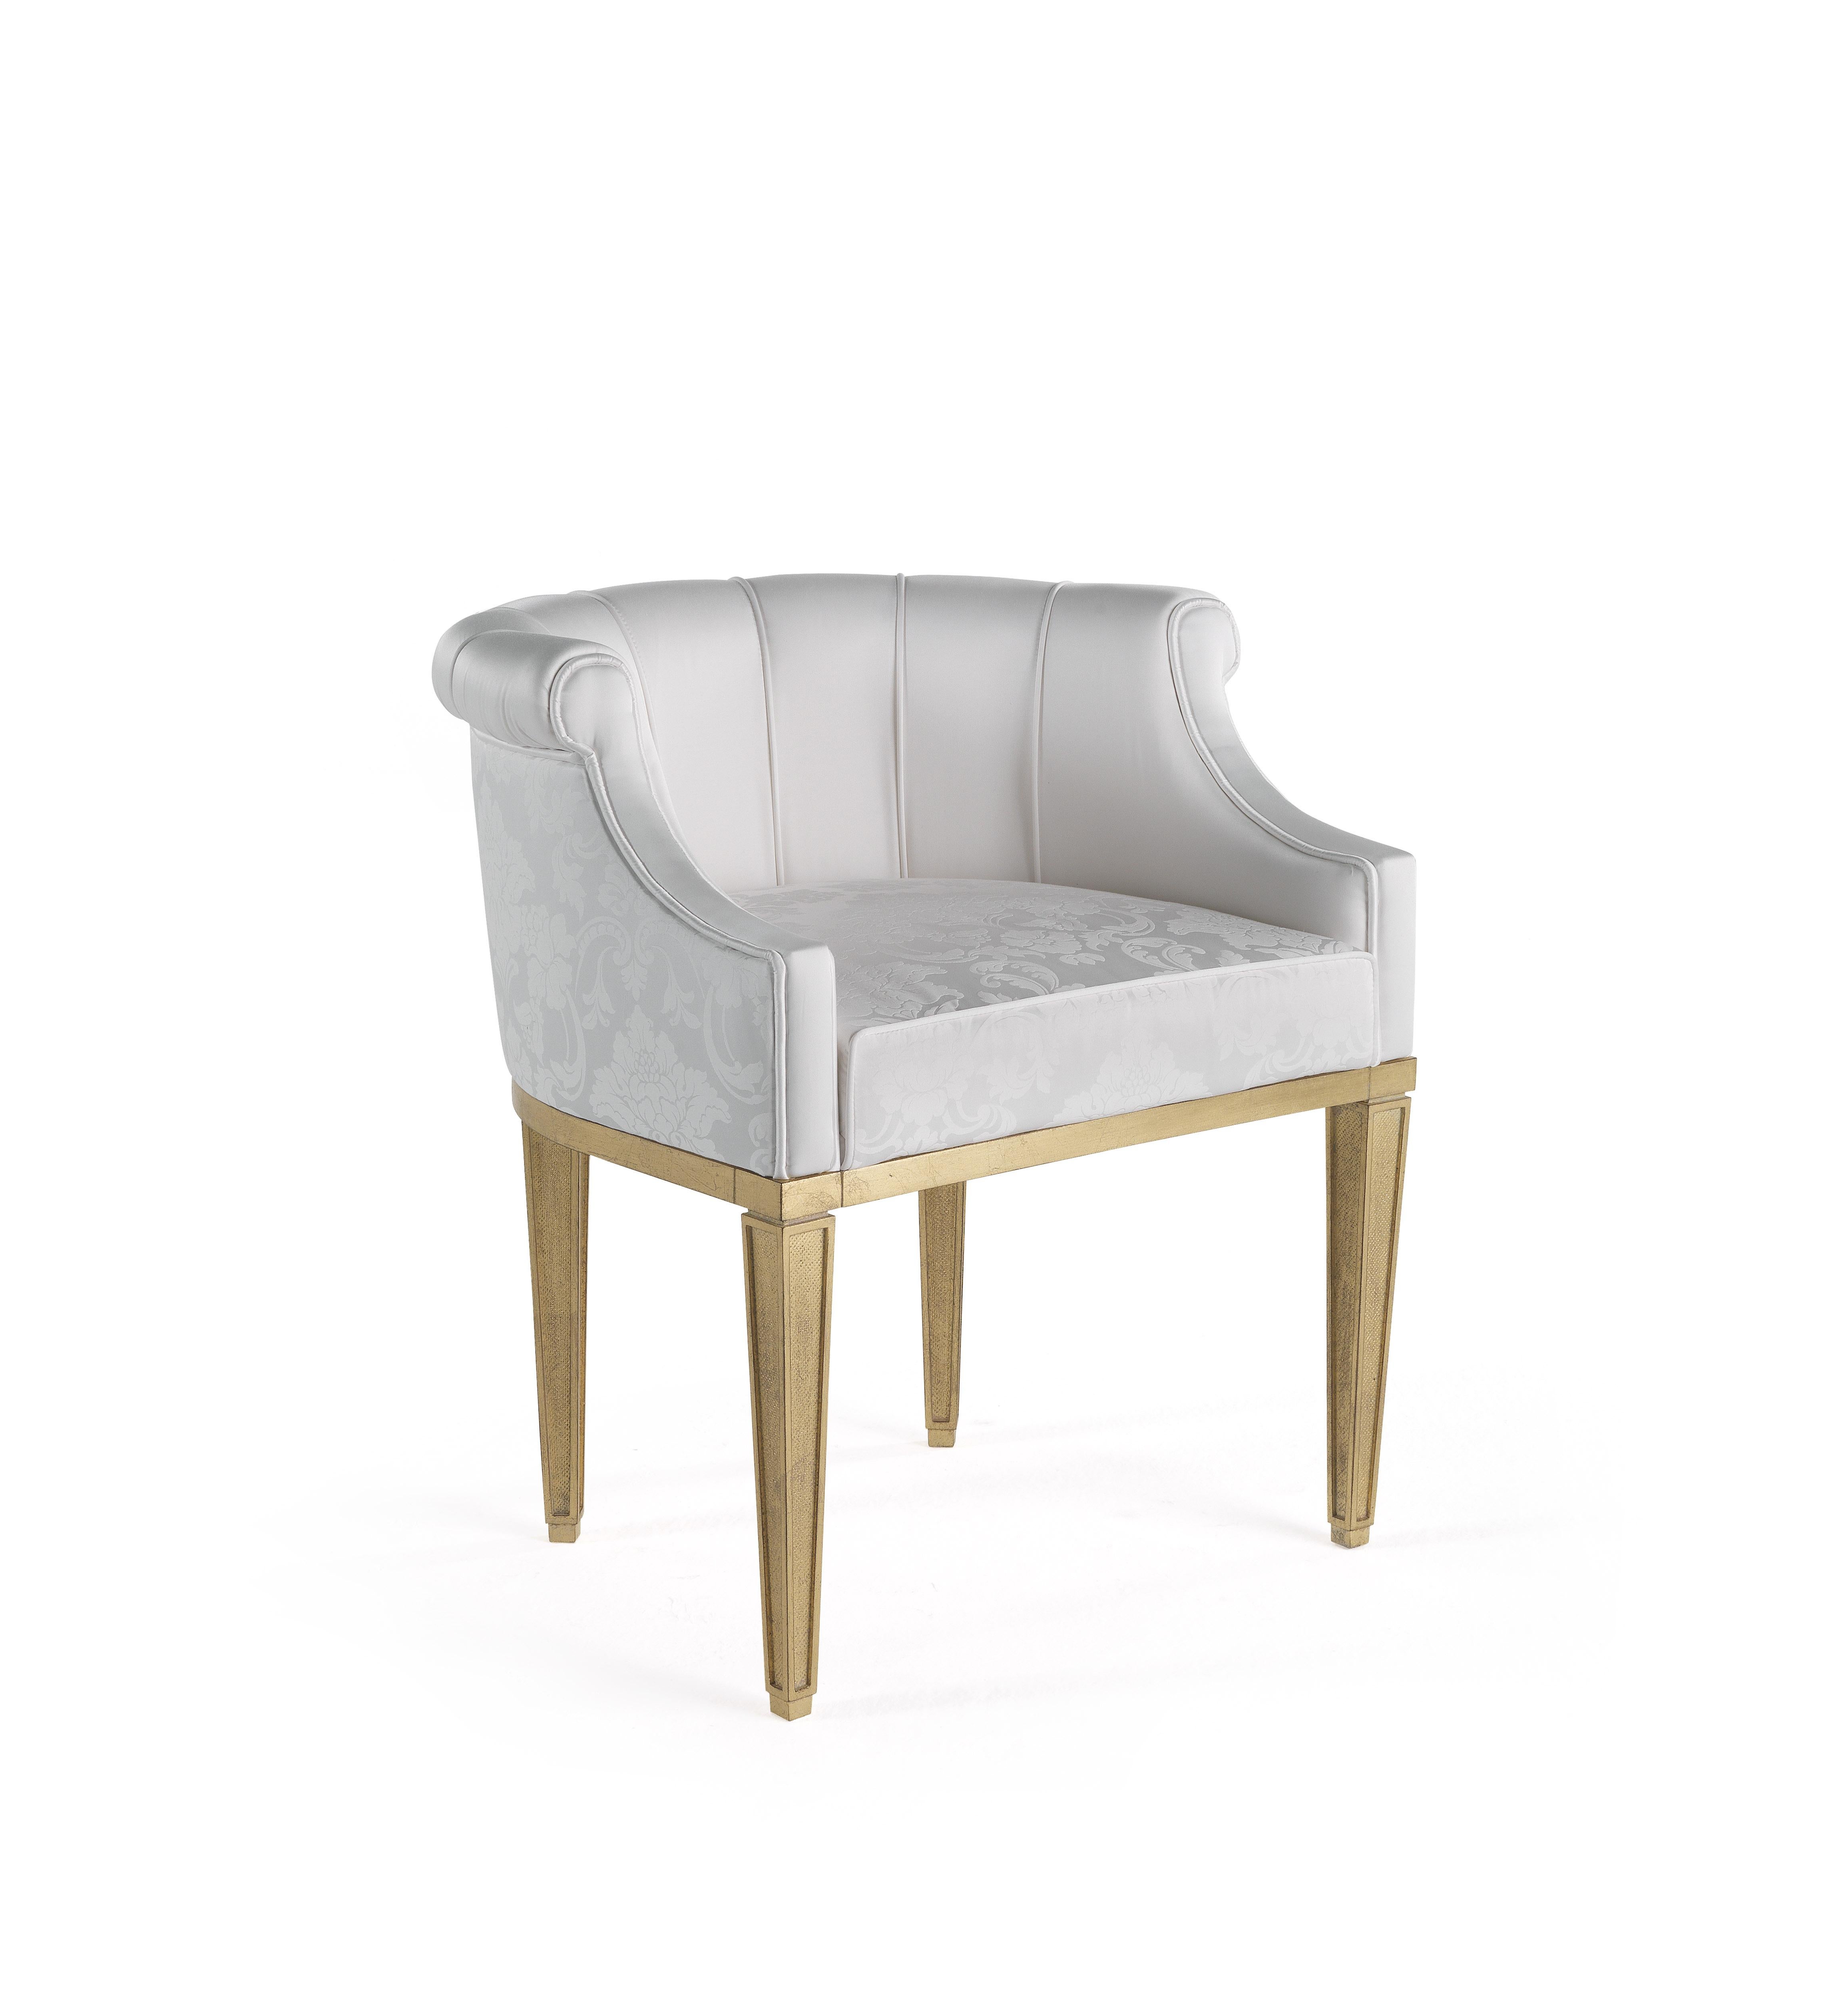 Halfway between chair and armchair, Fuji is a refined piece of furniture expressing a fresh and light-filled classic style. It features a shell-shaped backrest covered in silk satin of the collection and antiqued gold finished legs.
Fuji chair with